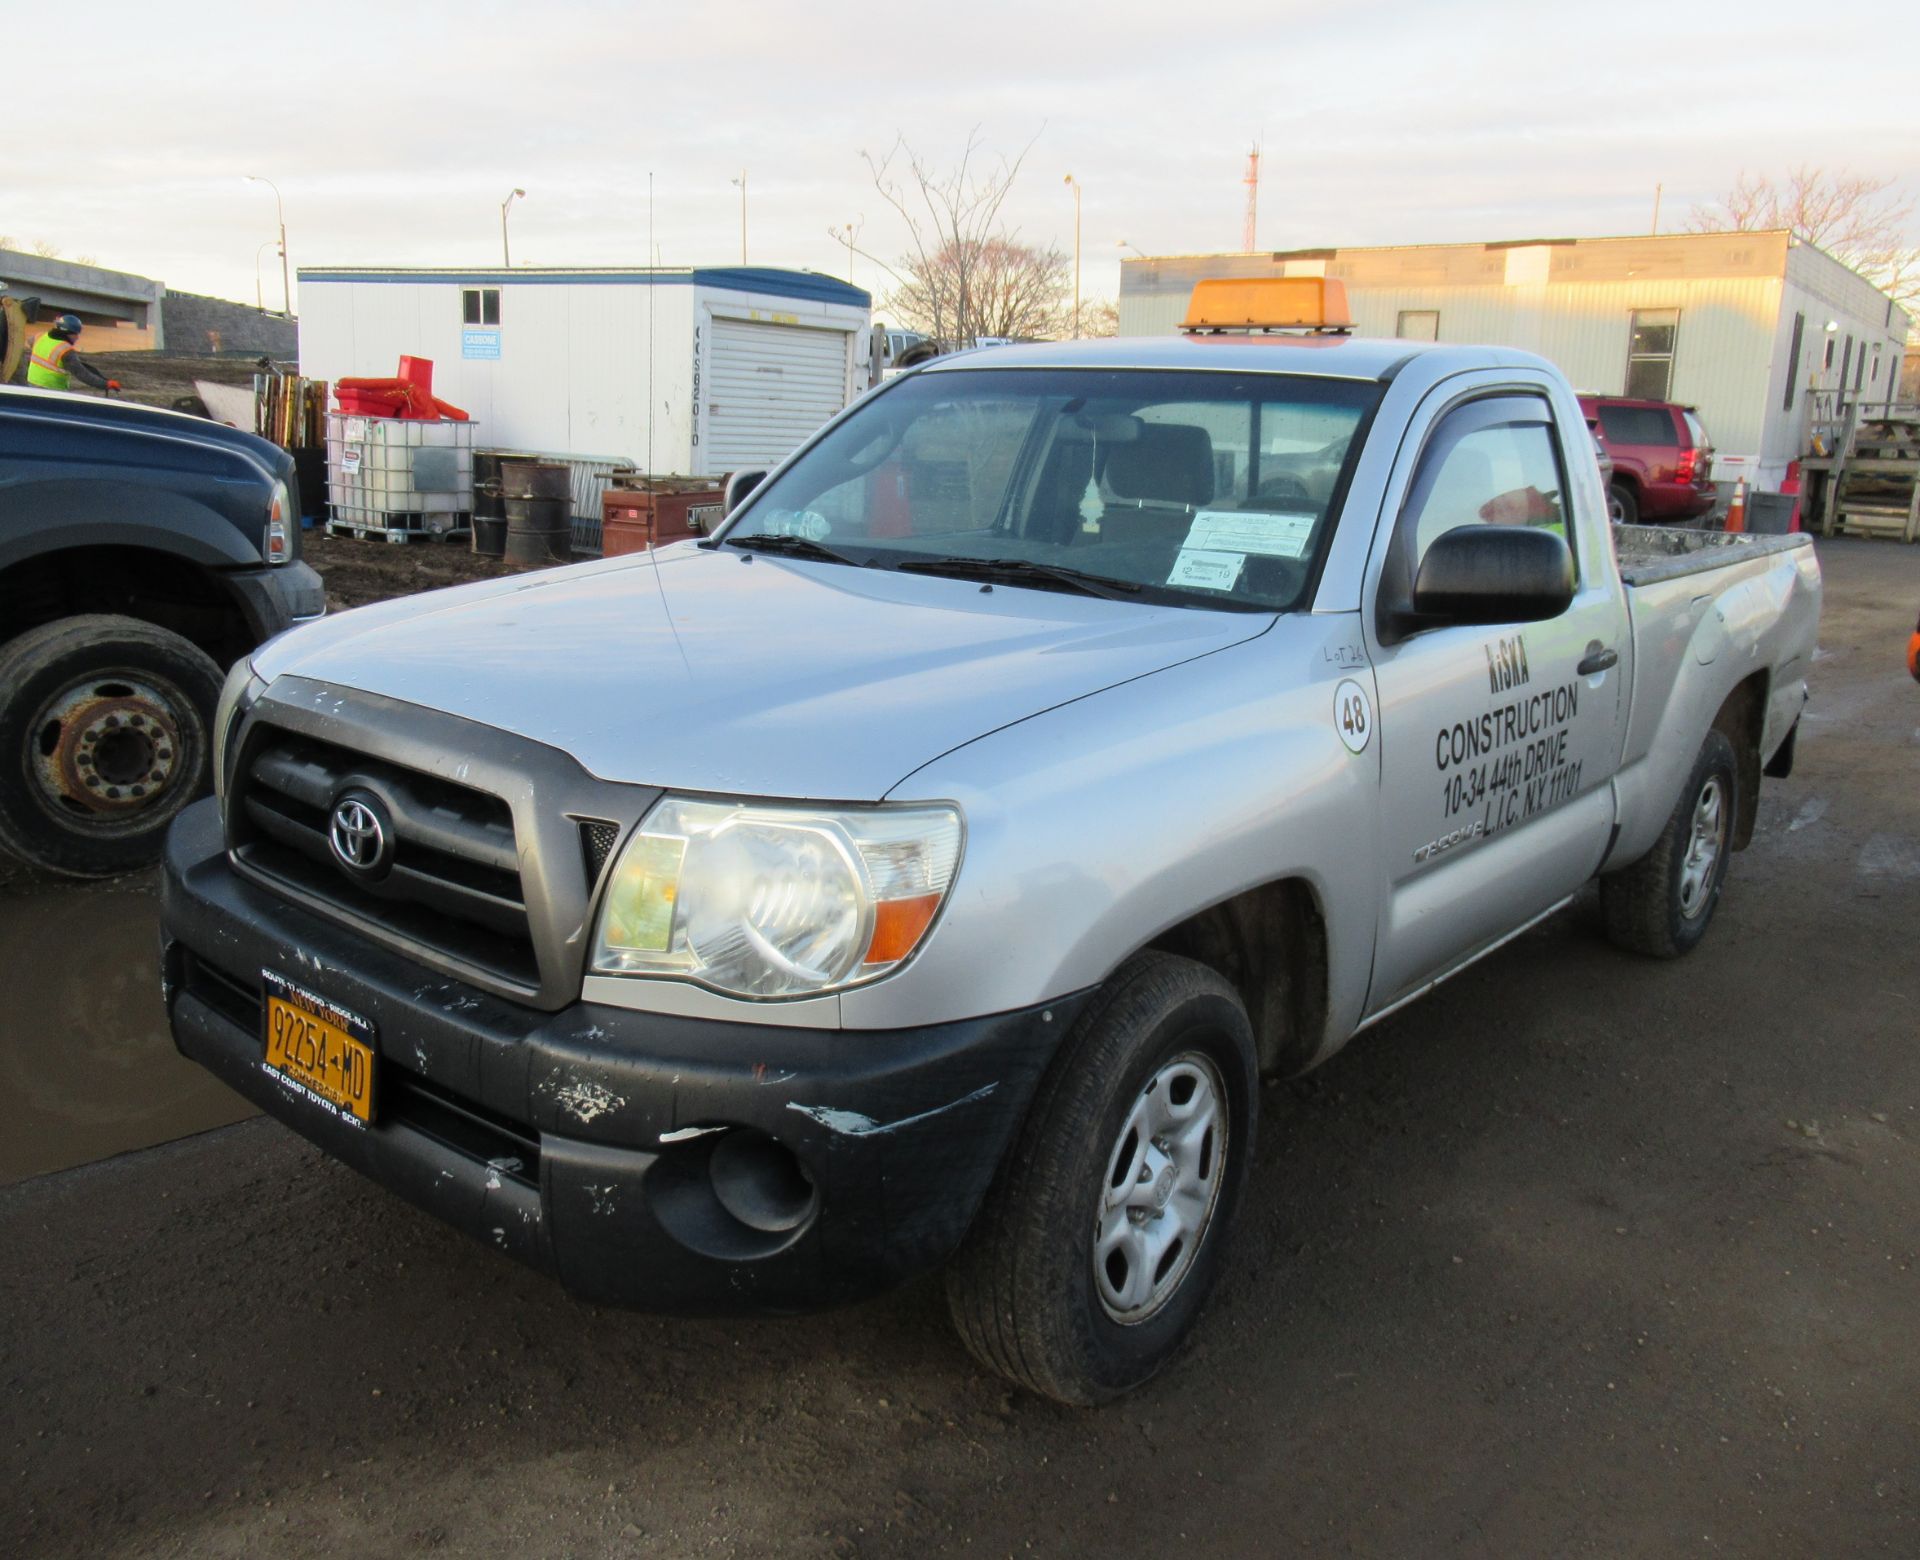 2008 TOYOTA TACOMA PICKUP TRUCK, AUTOMATIC, WITH APPROXIMATELY 105,732 MILES, VIN: 5TENX22N382504186